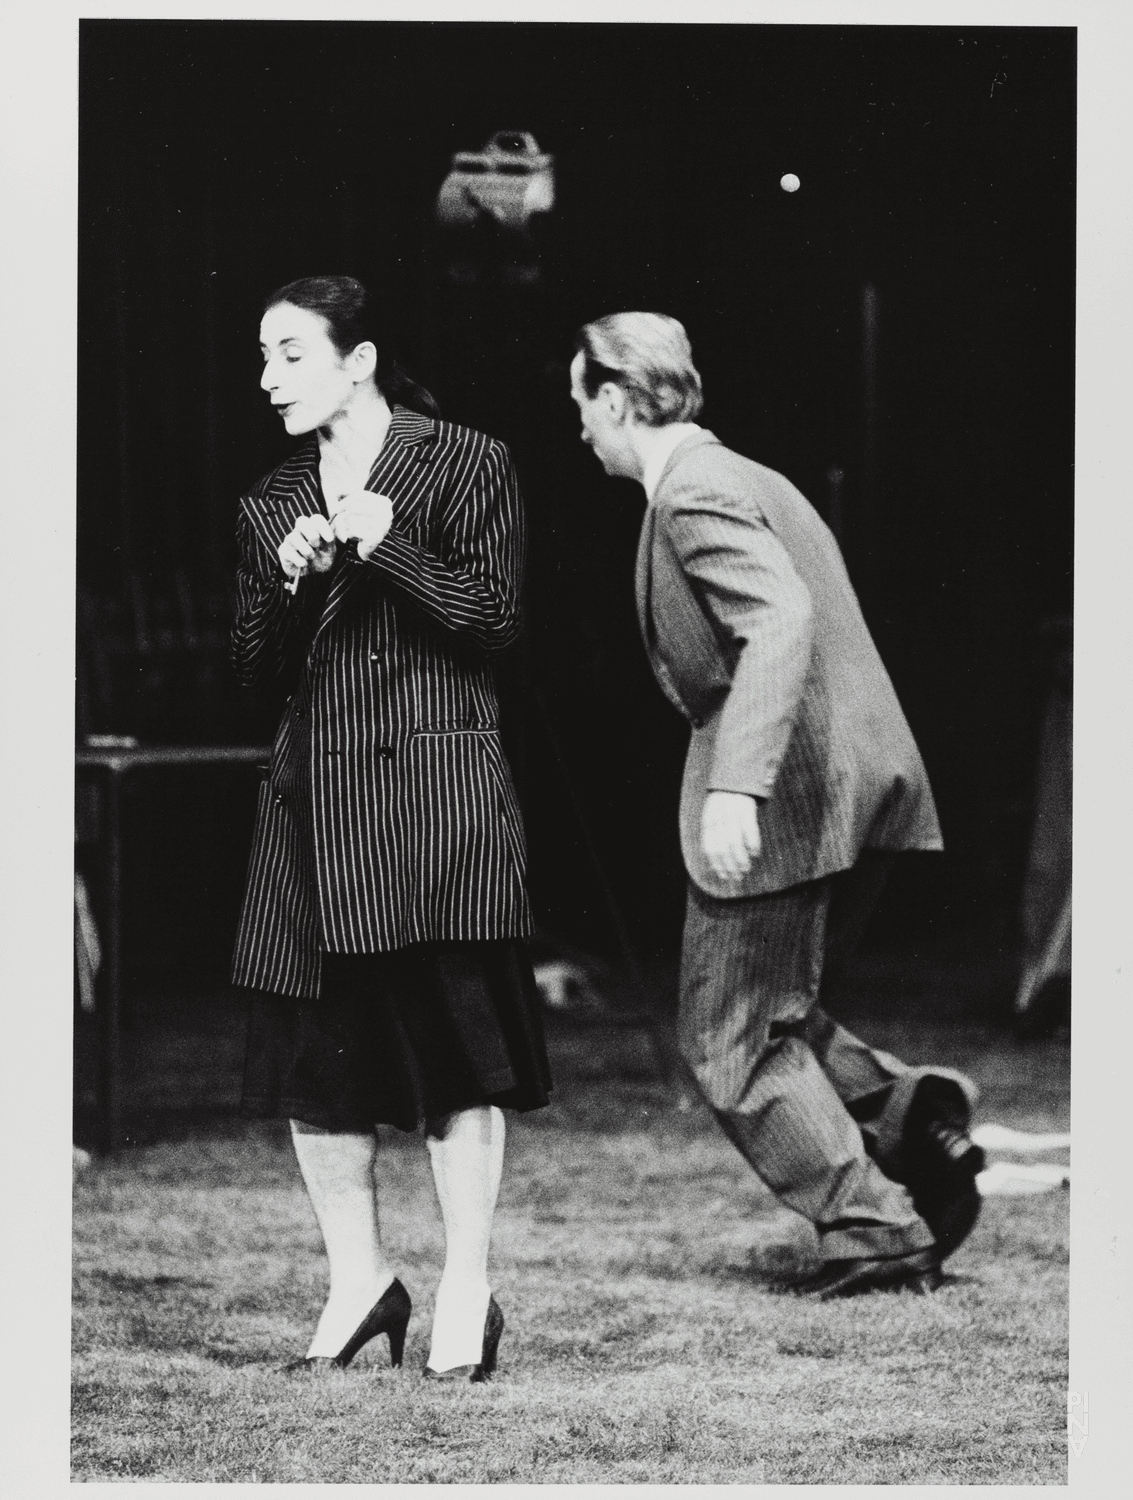 Dominique Mercy and Beatrice Libonati in “1980 – A Piece by Pina Bausch” by Pina Bausch